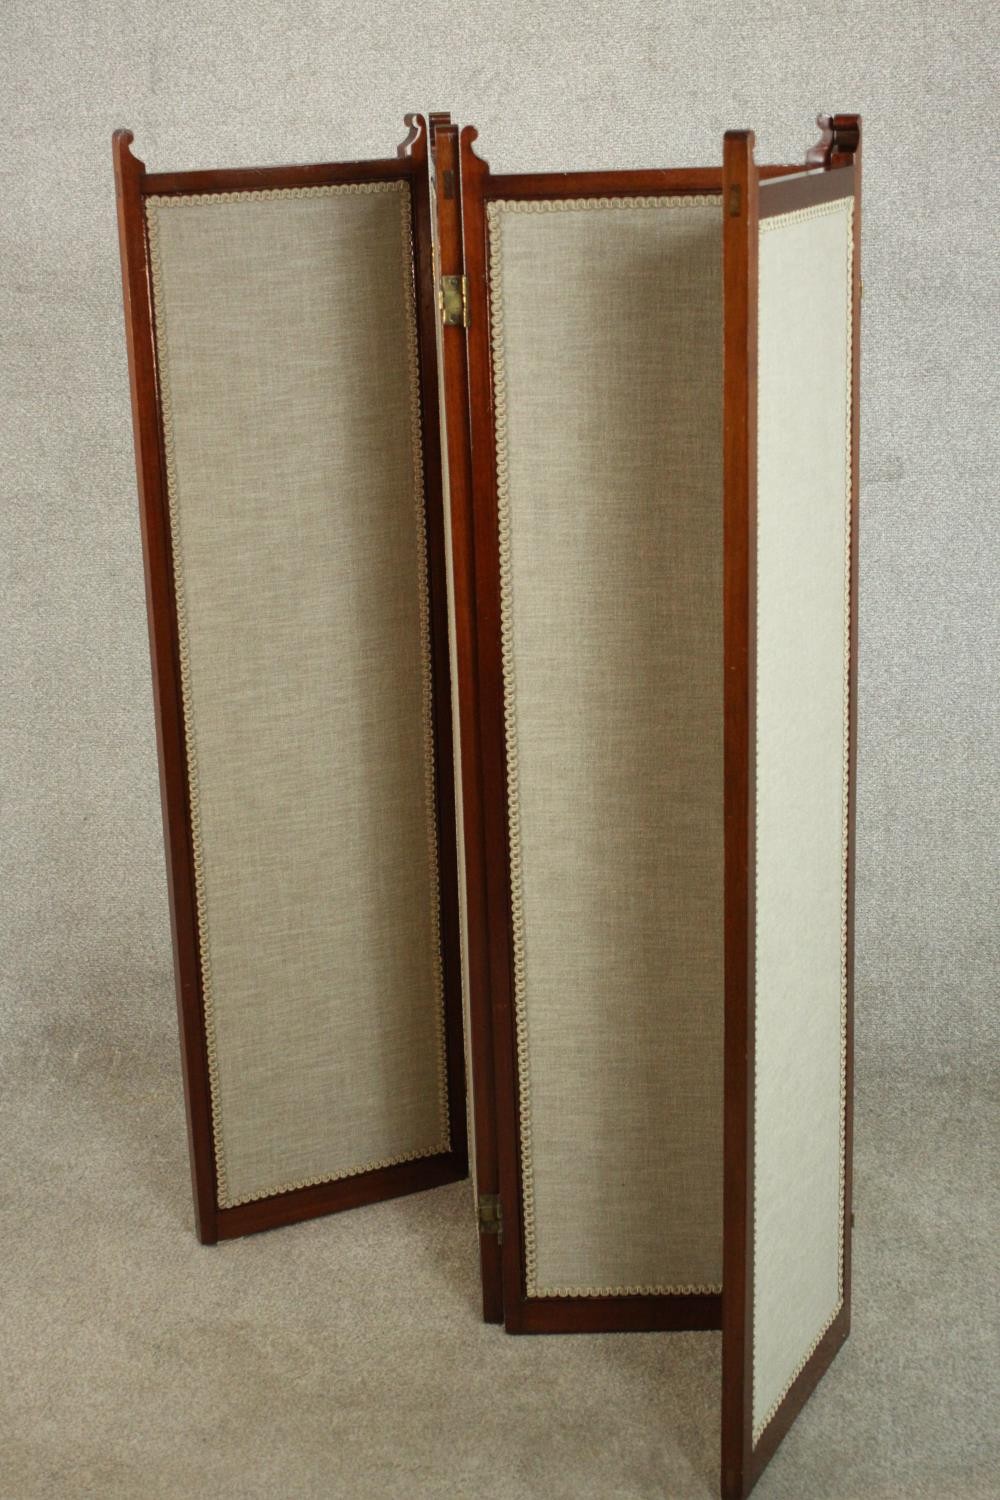 An Edwardian walnut fourfold screen, each panel upholstered with an oatmeal coloured fabric, with - Image 7 of 10